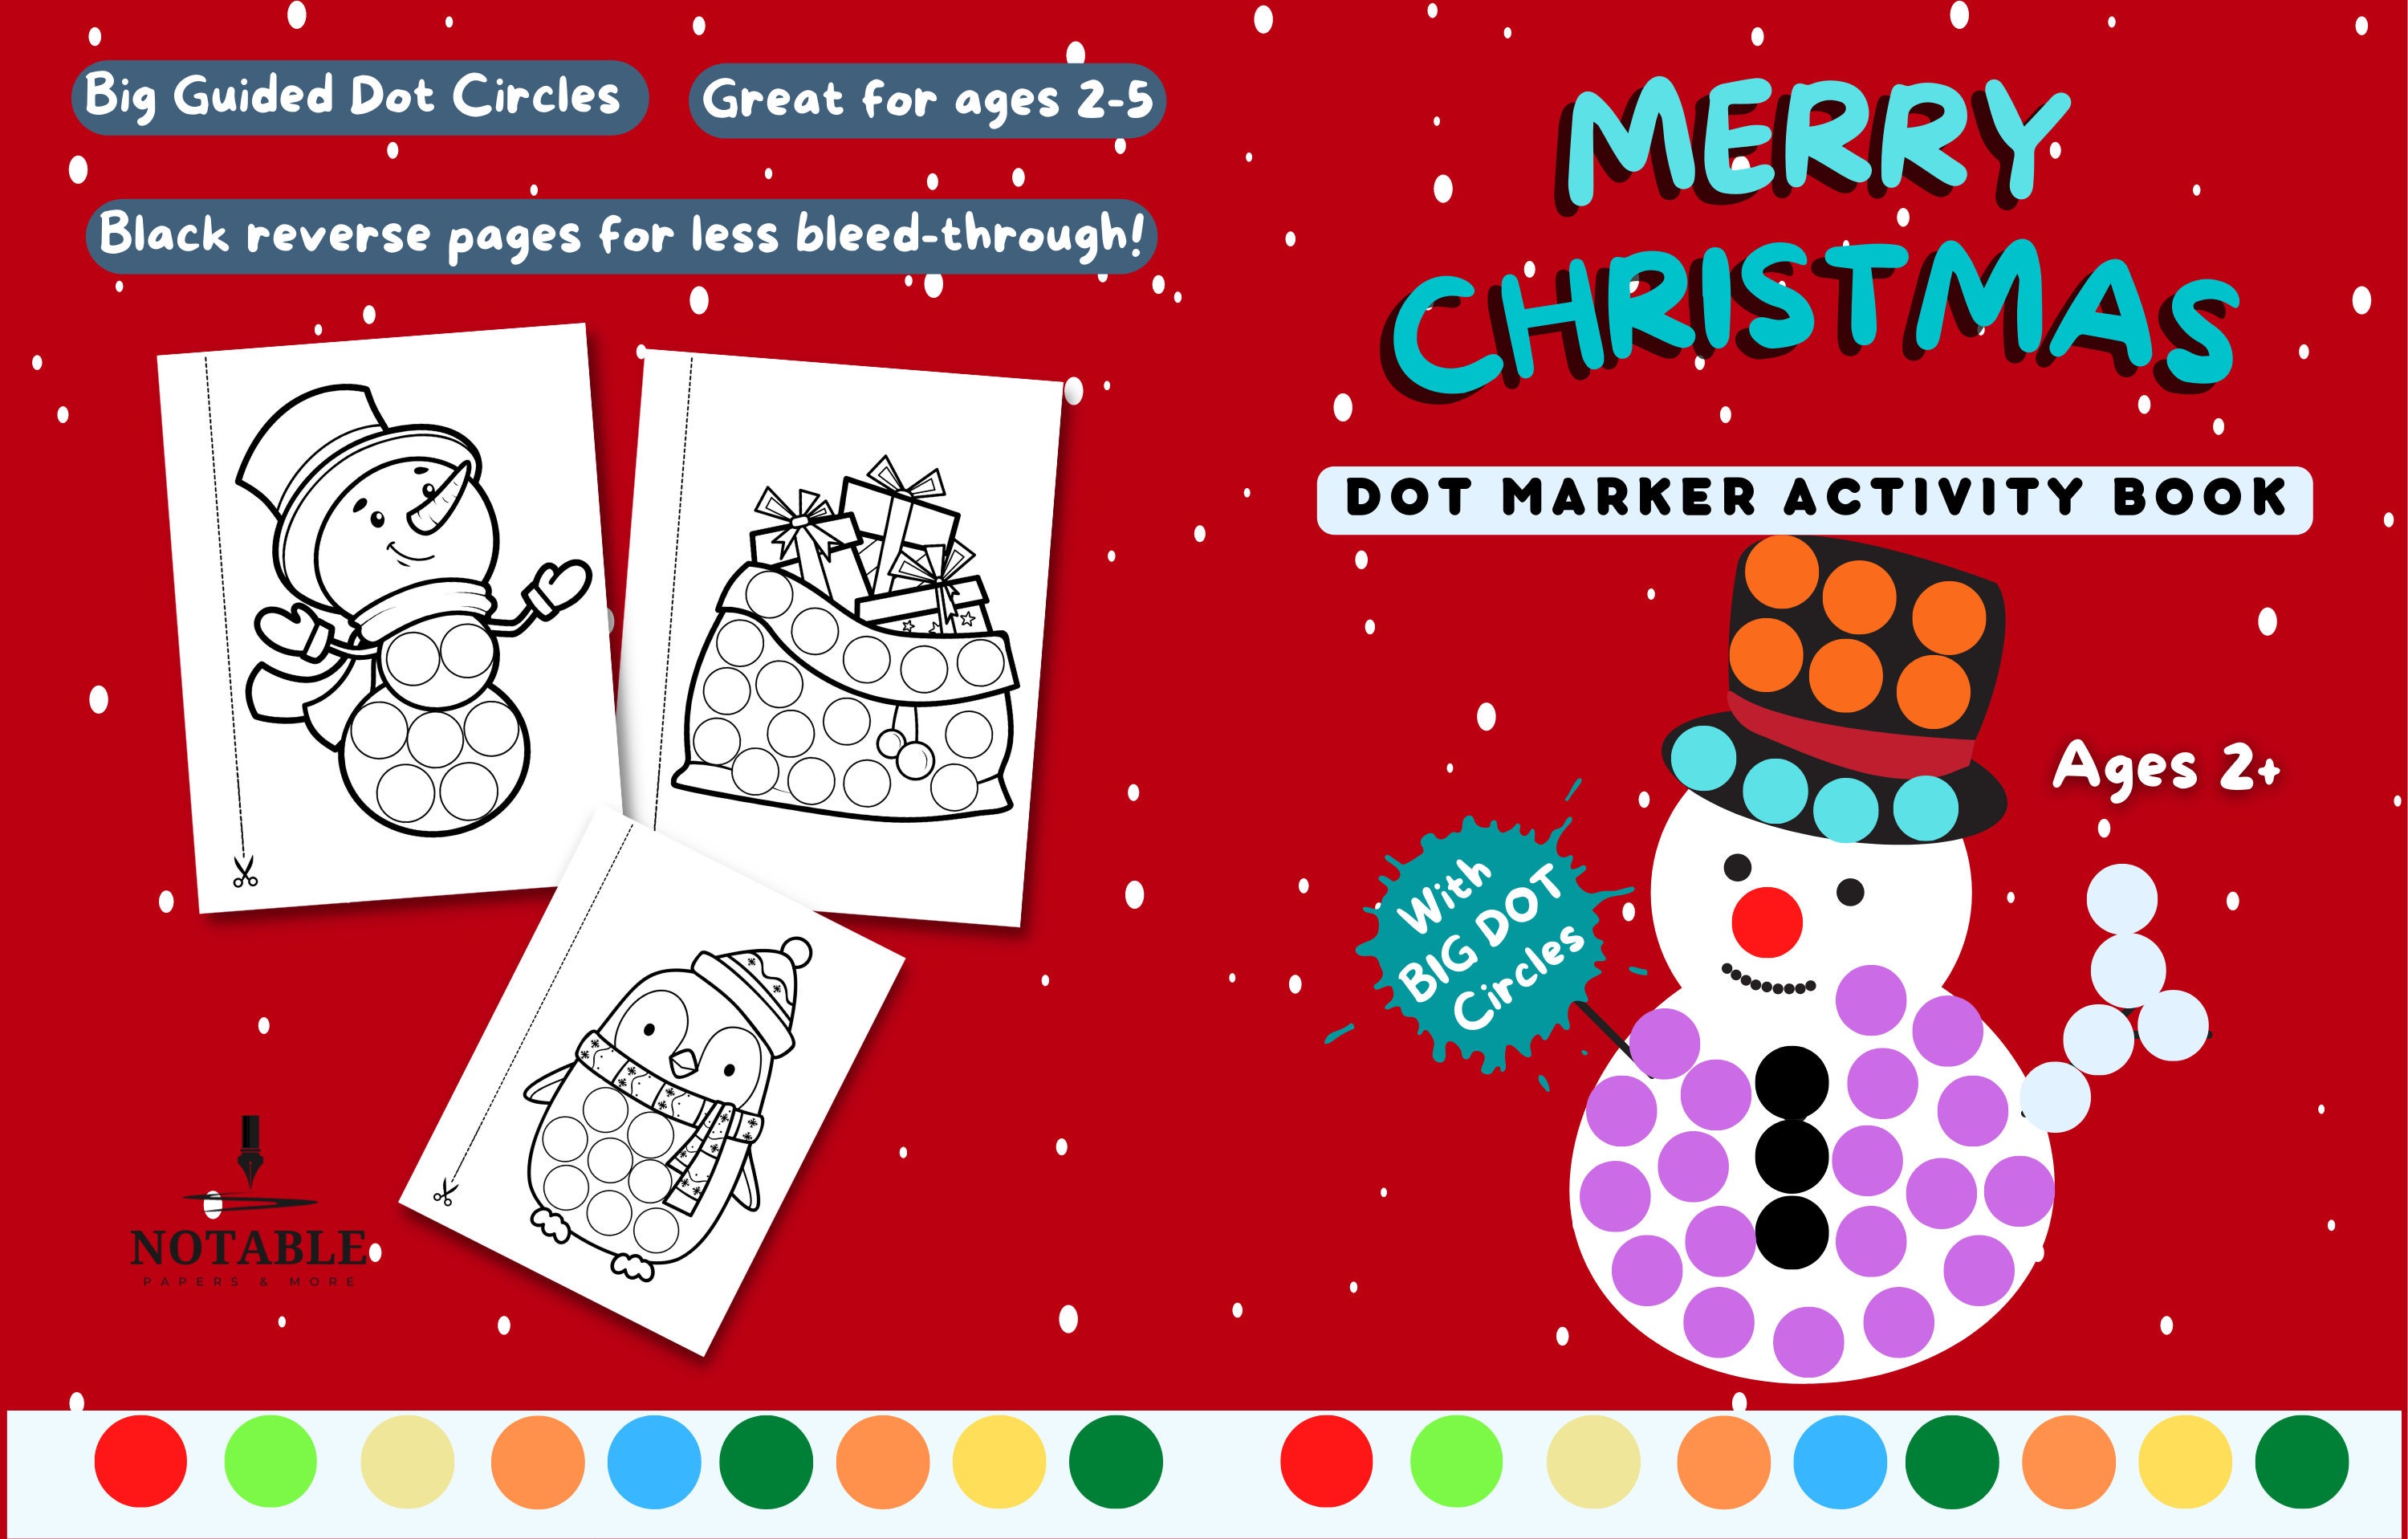 Dot Markers Activity Book for Toddlers and Kids Alphabet: Easy Guided Big  Dots, ABC Fun Coloring Art Activity Book for Kids to use with Paint  Daubers,  Toddlers and Preschool Ages 1